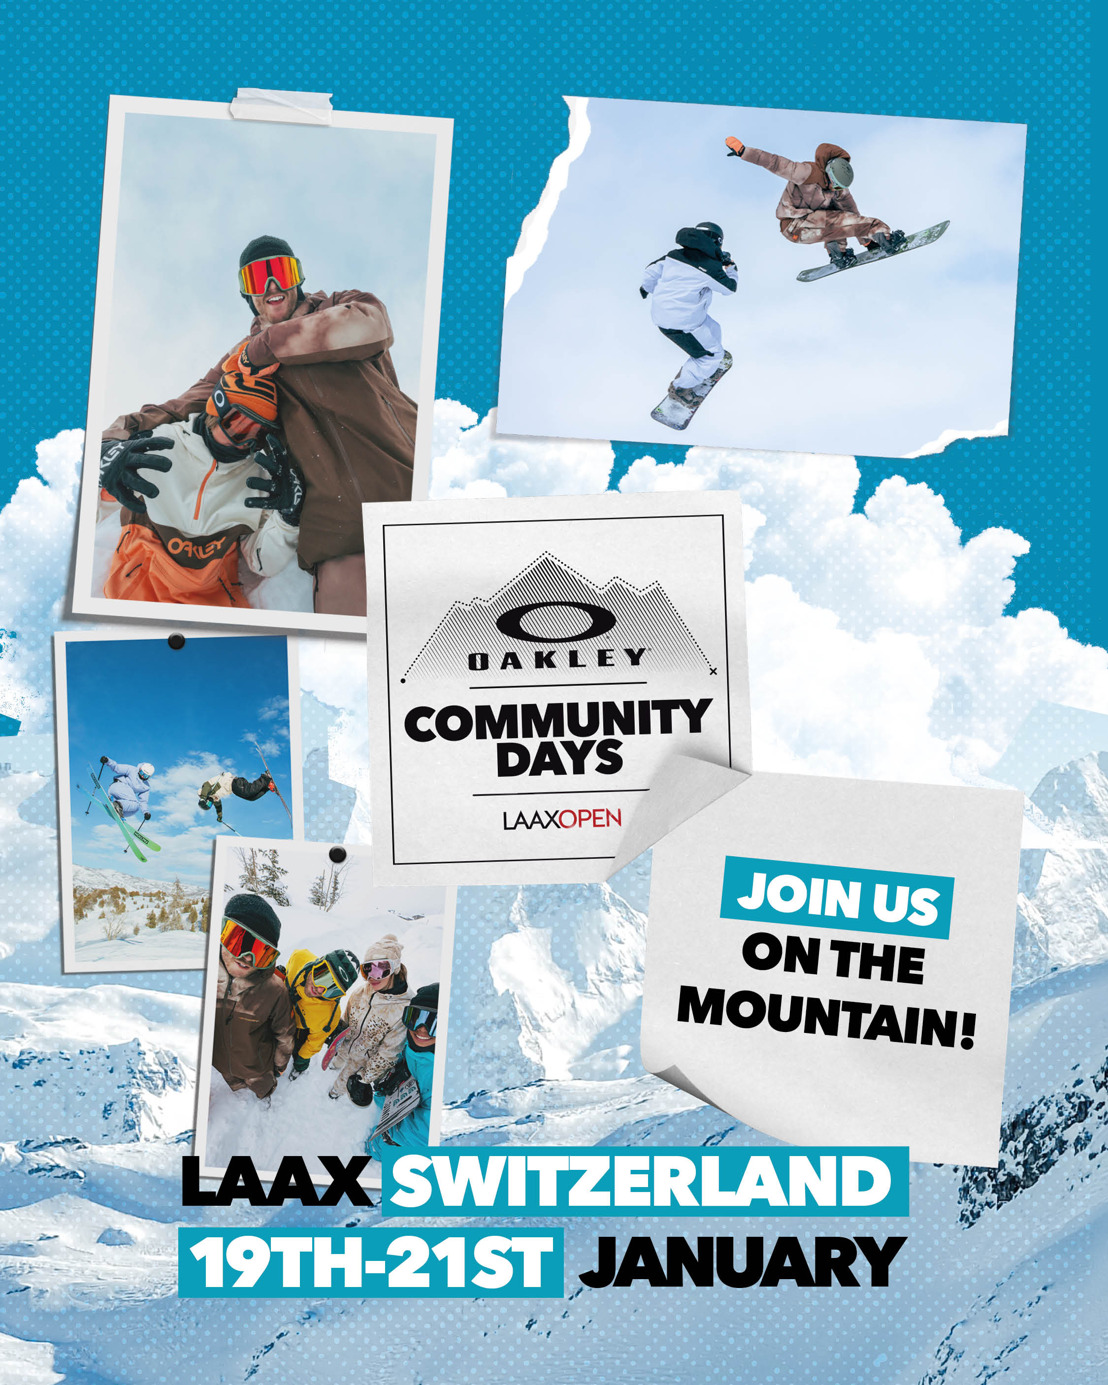 SEND IT WITH OAKLEY COMMUNITY DAYS AT LAAX